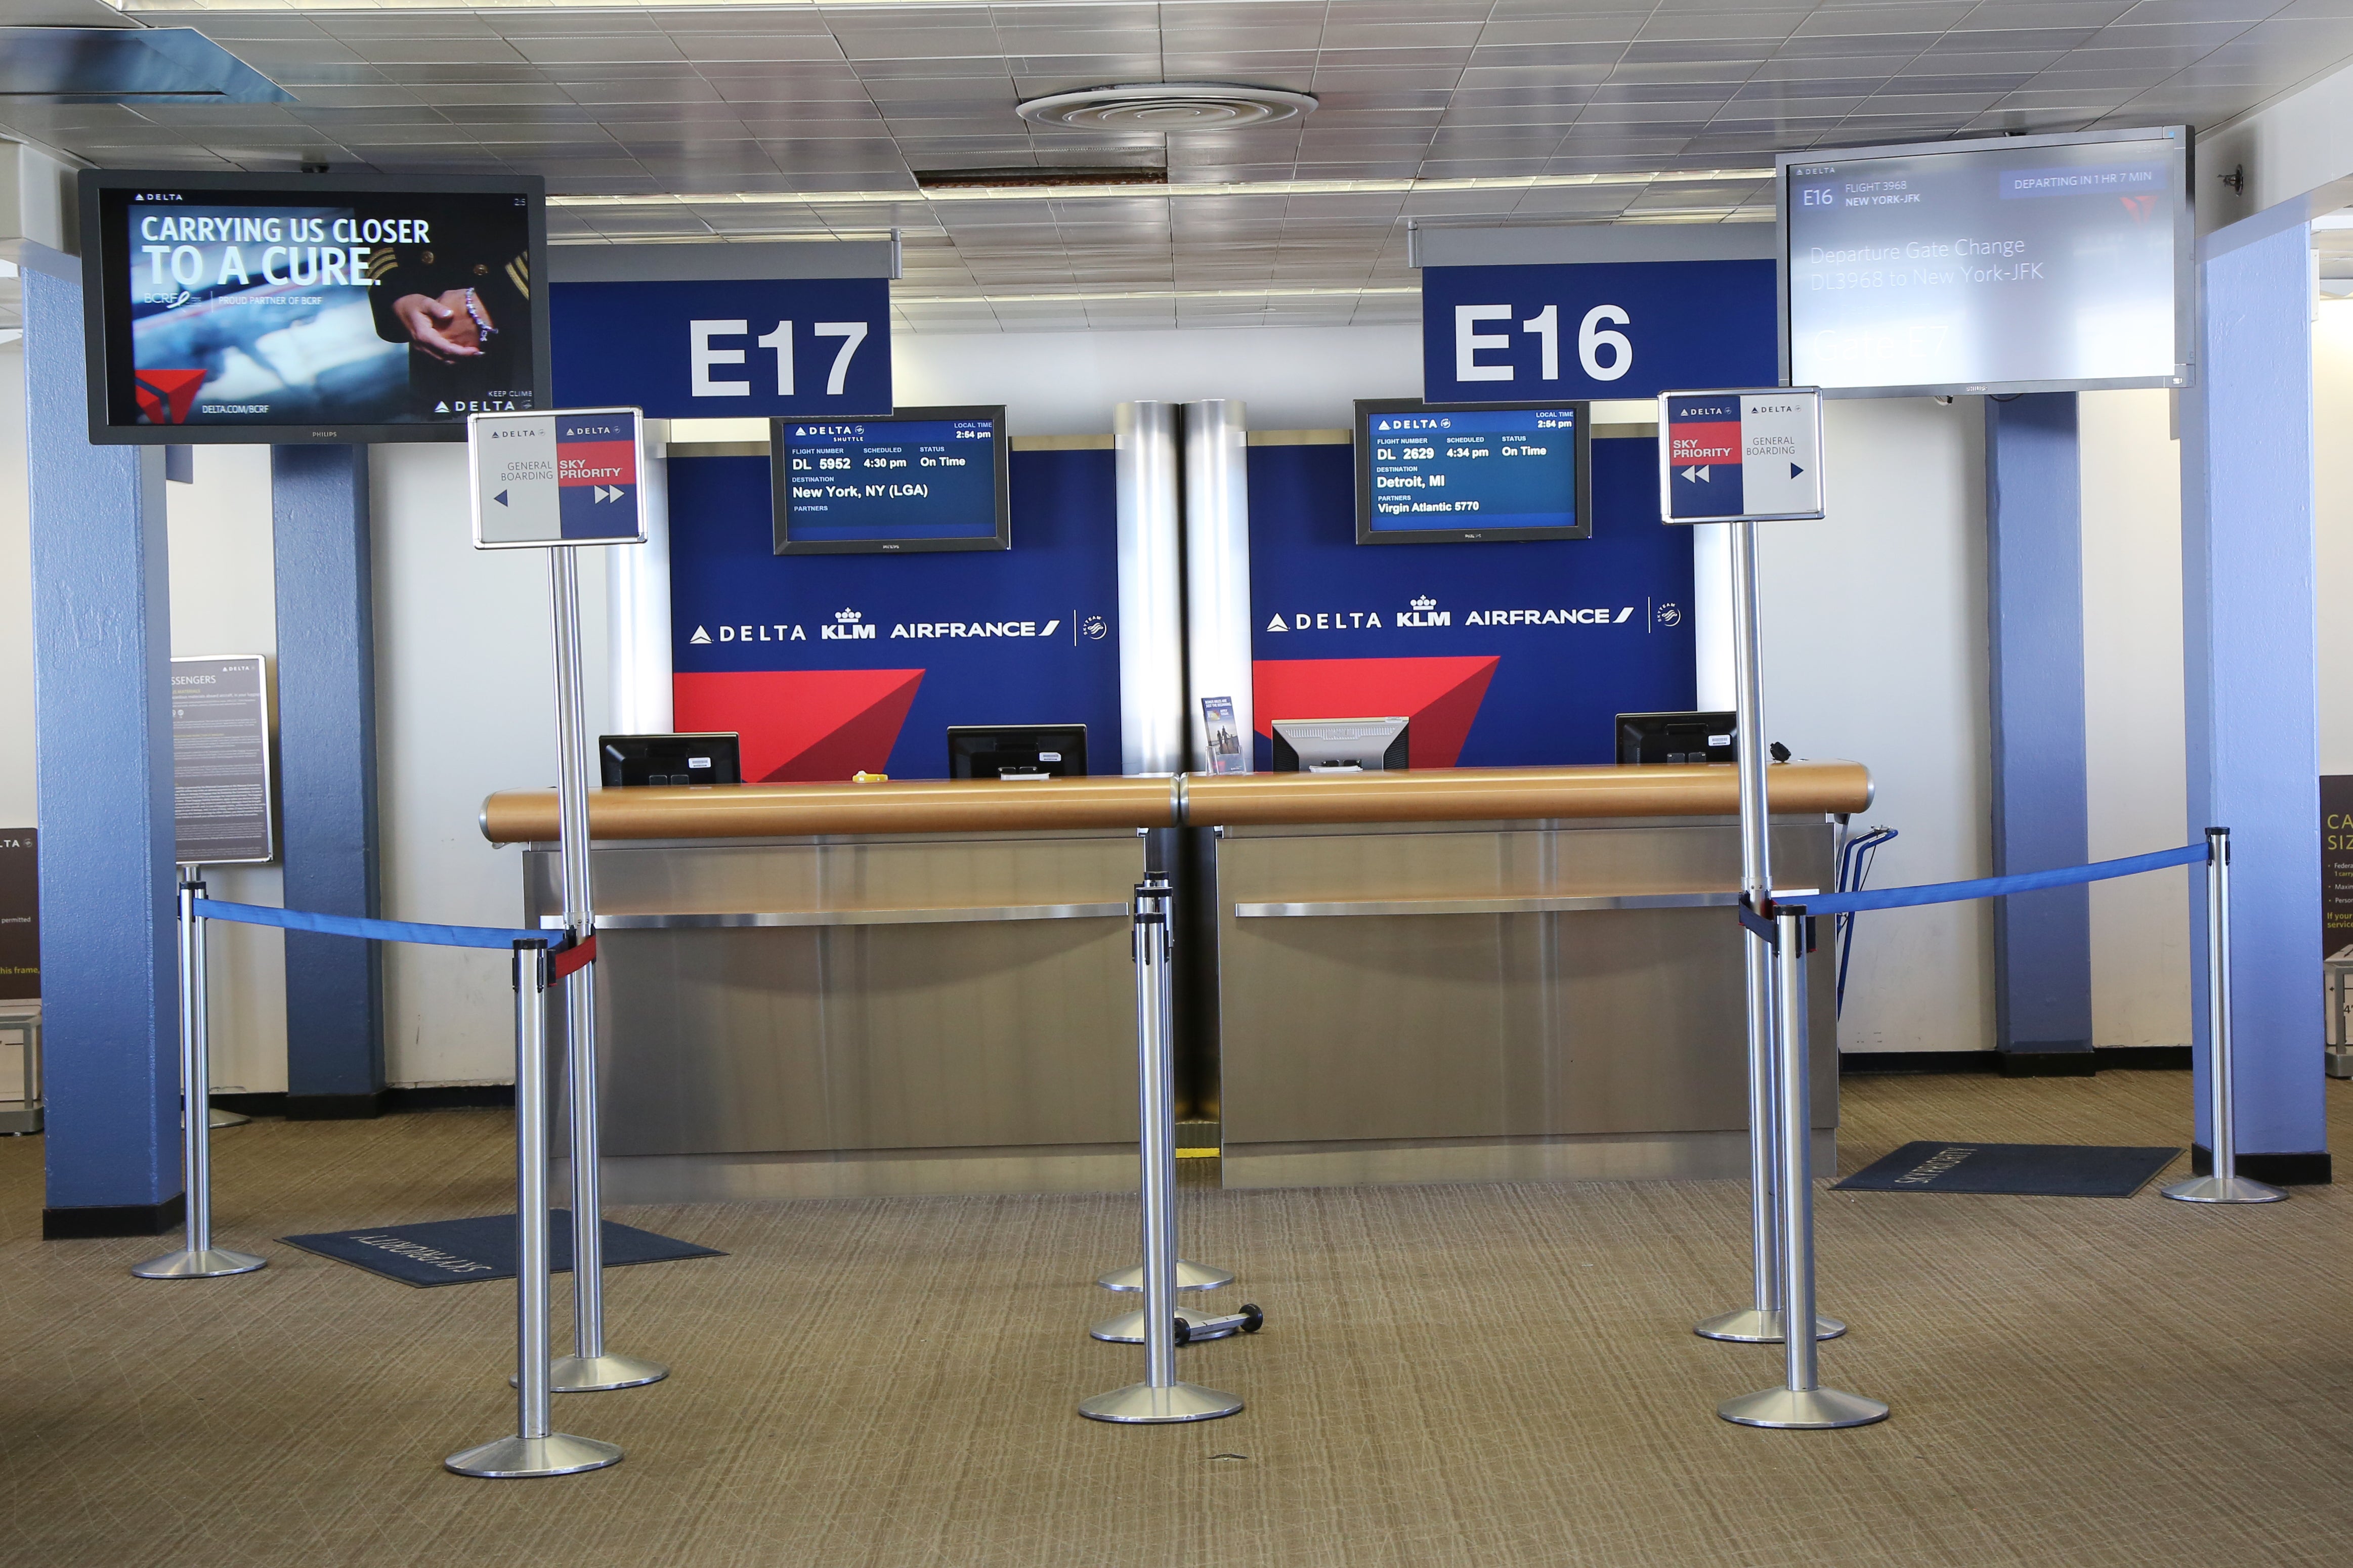 Delta Air Lines Boarding Zones A Complete Guide [2020]